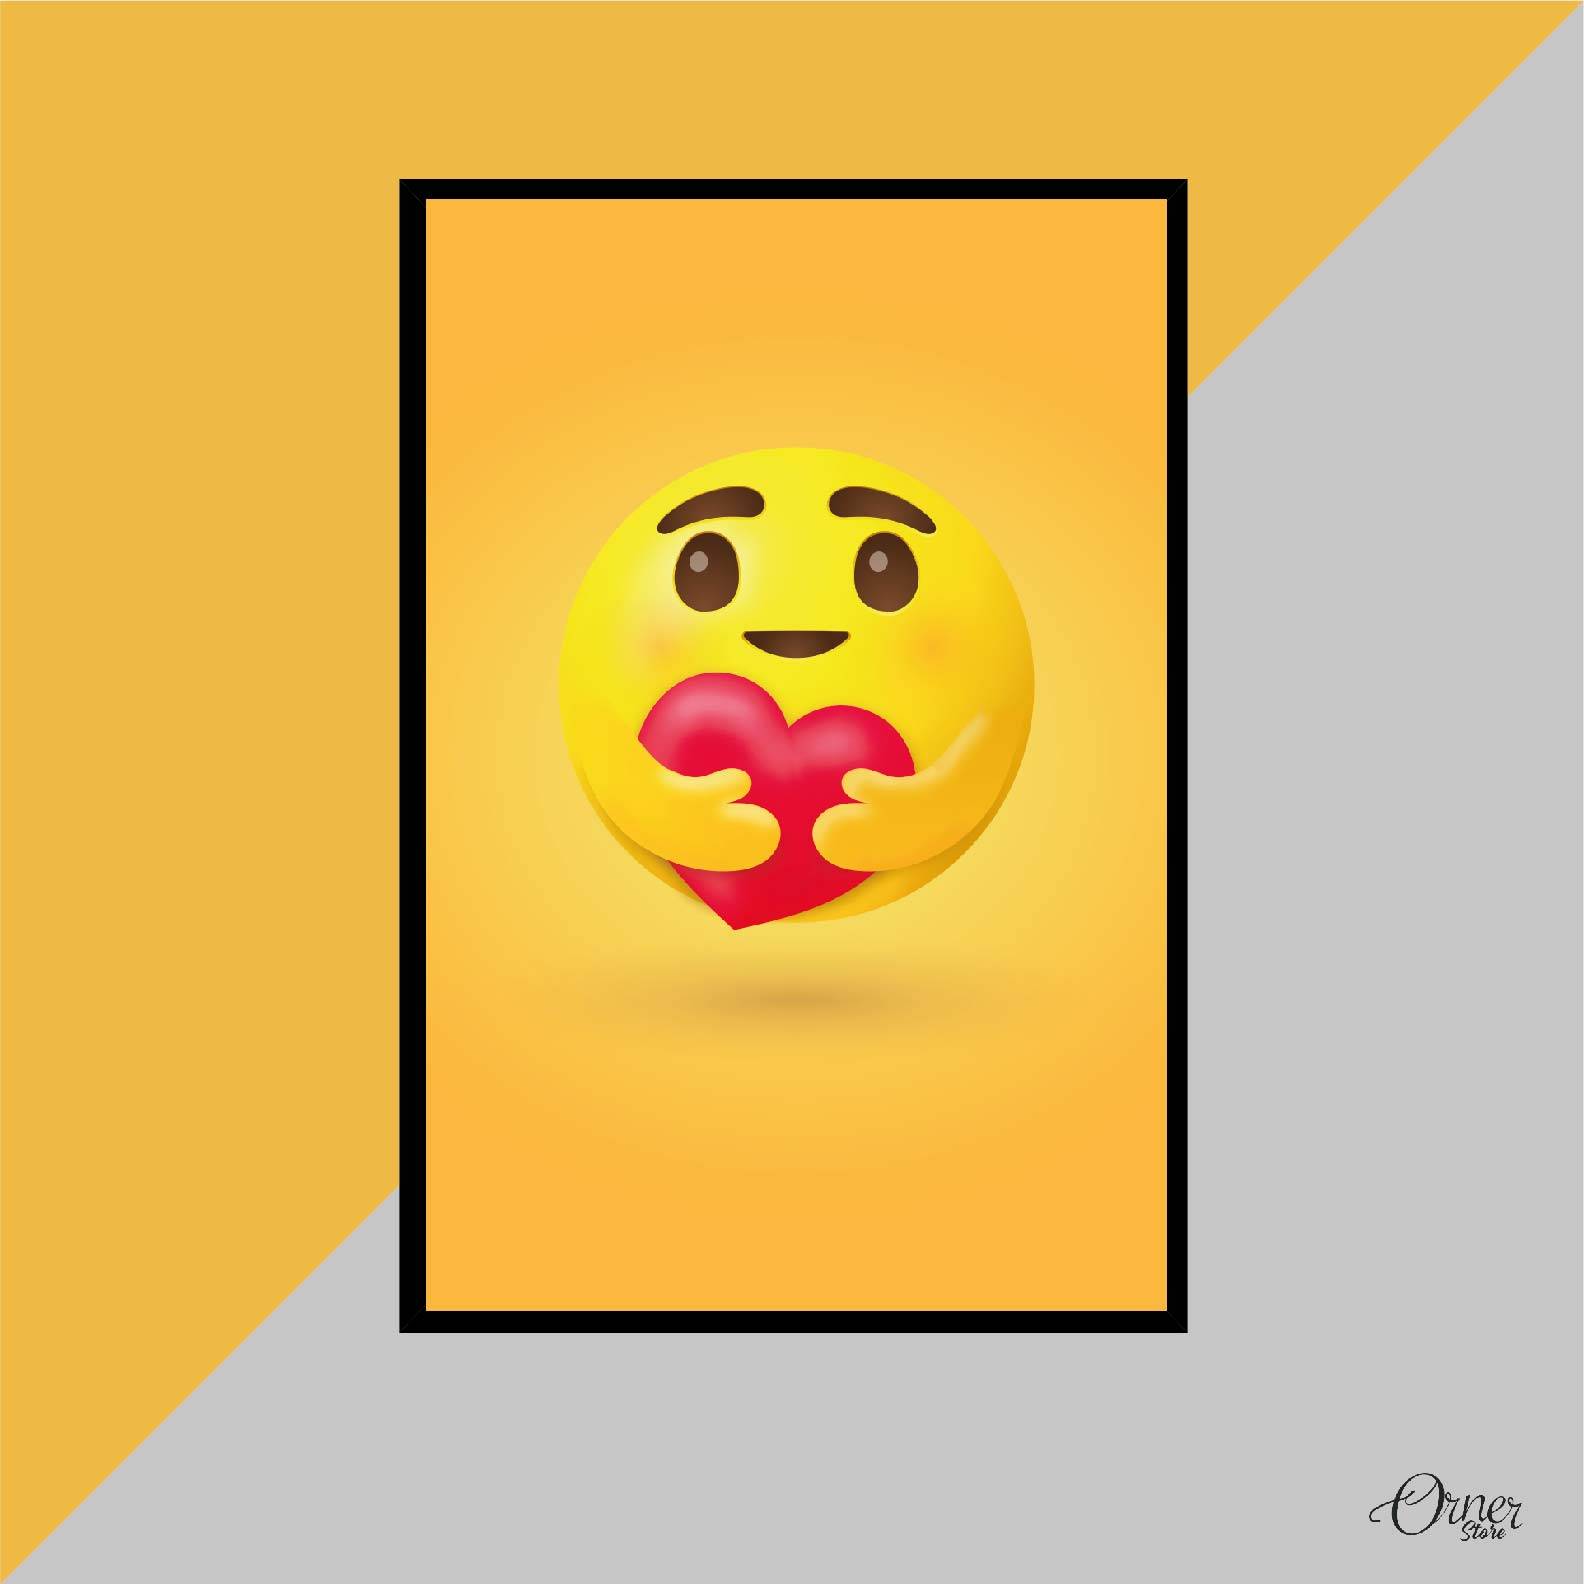 care emojis hugging a red heart